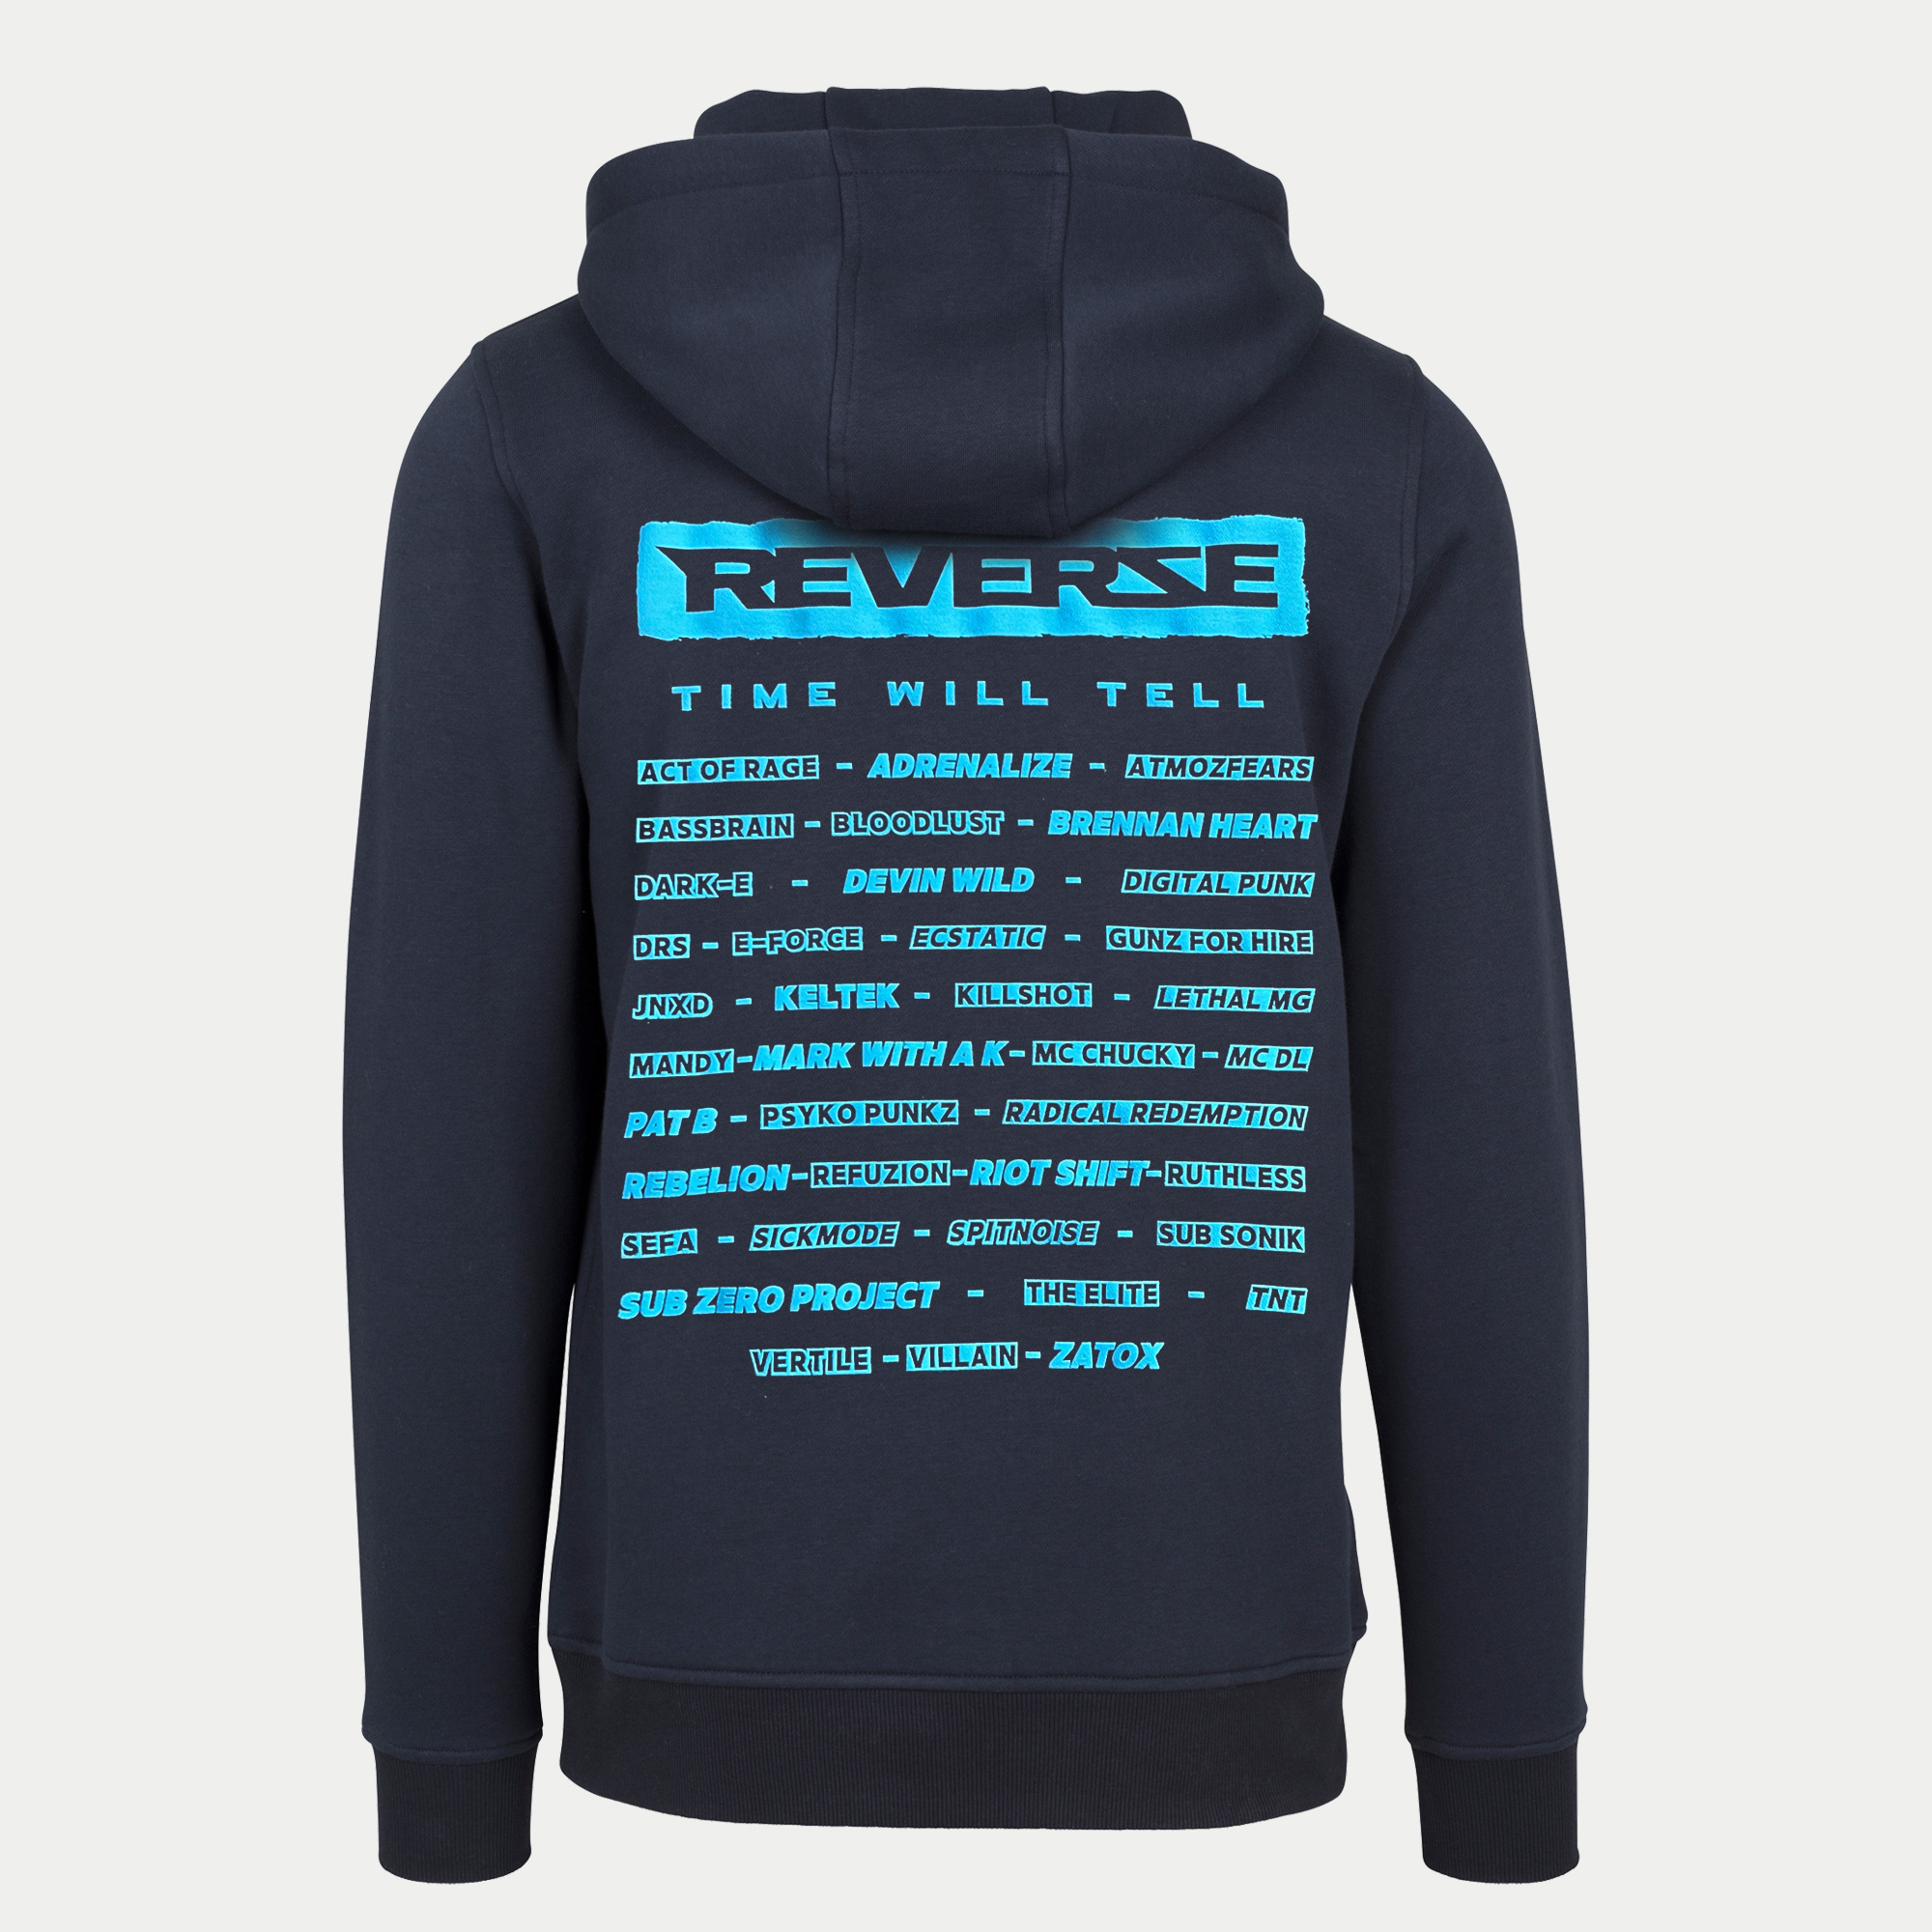 Reverze - Time Will Tell Lineup Hoodie